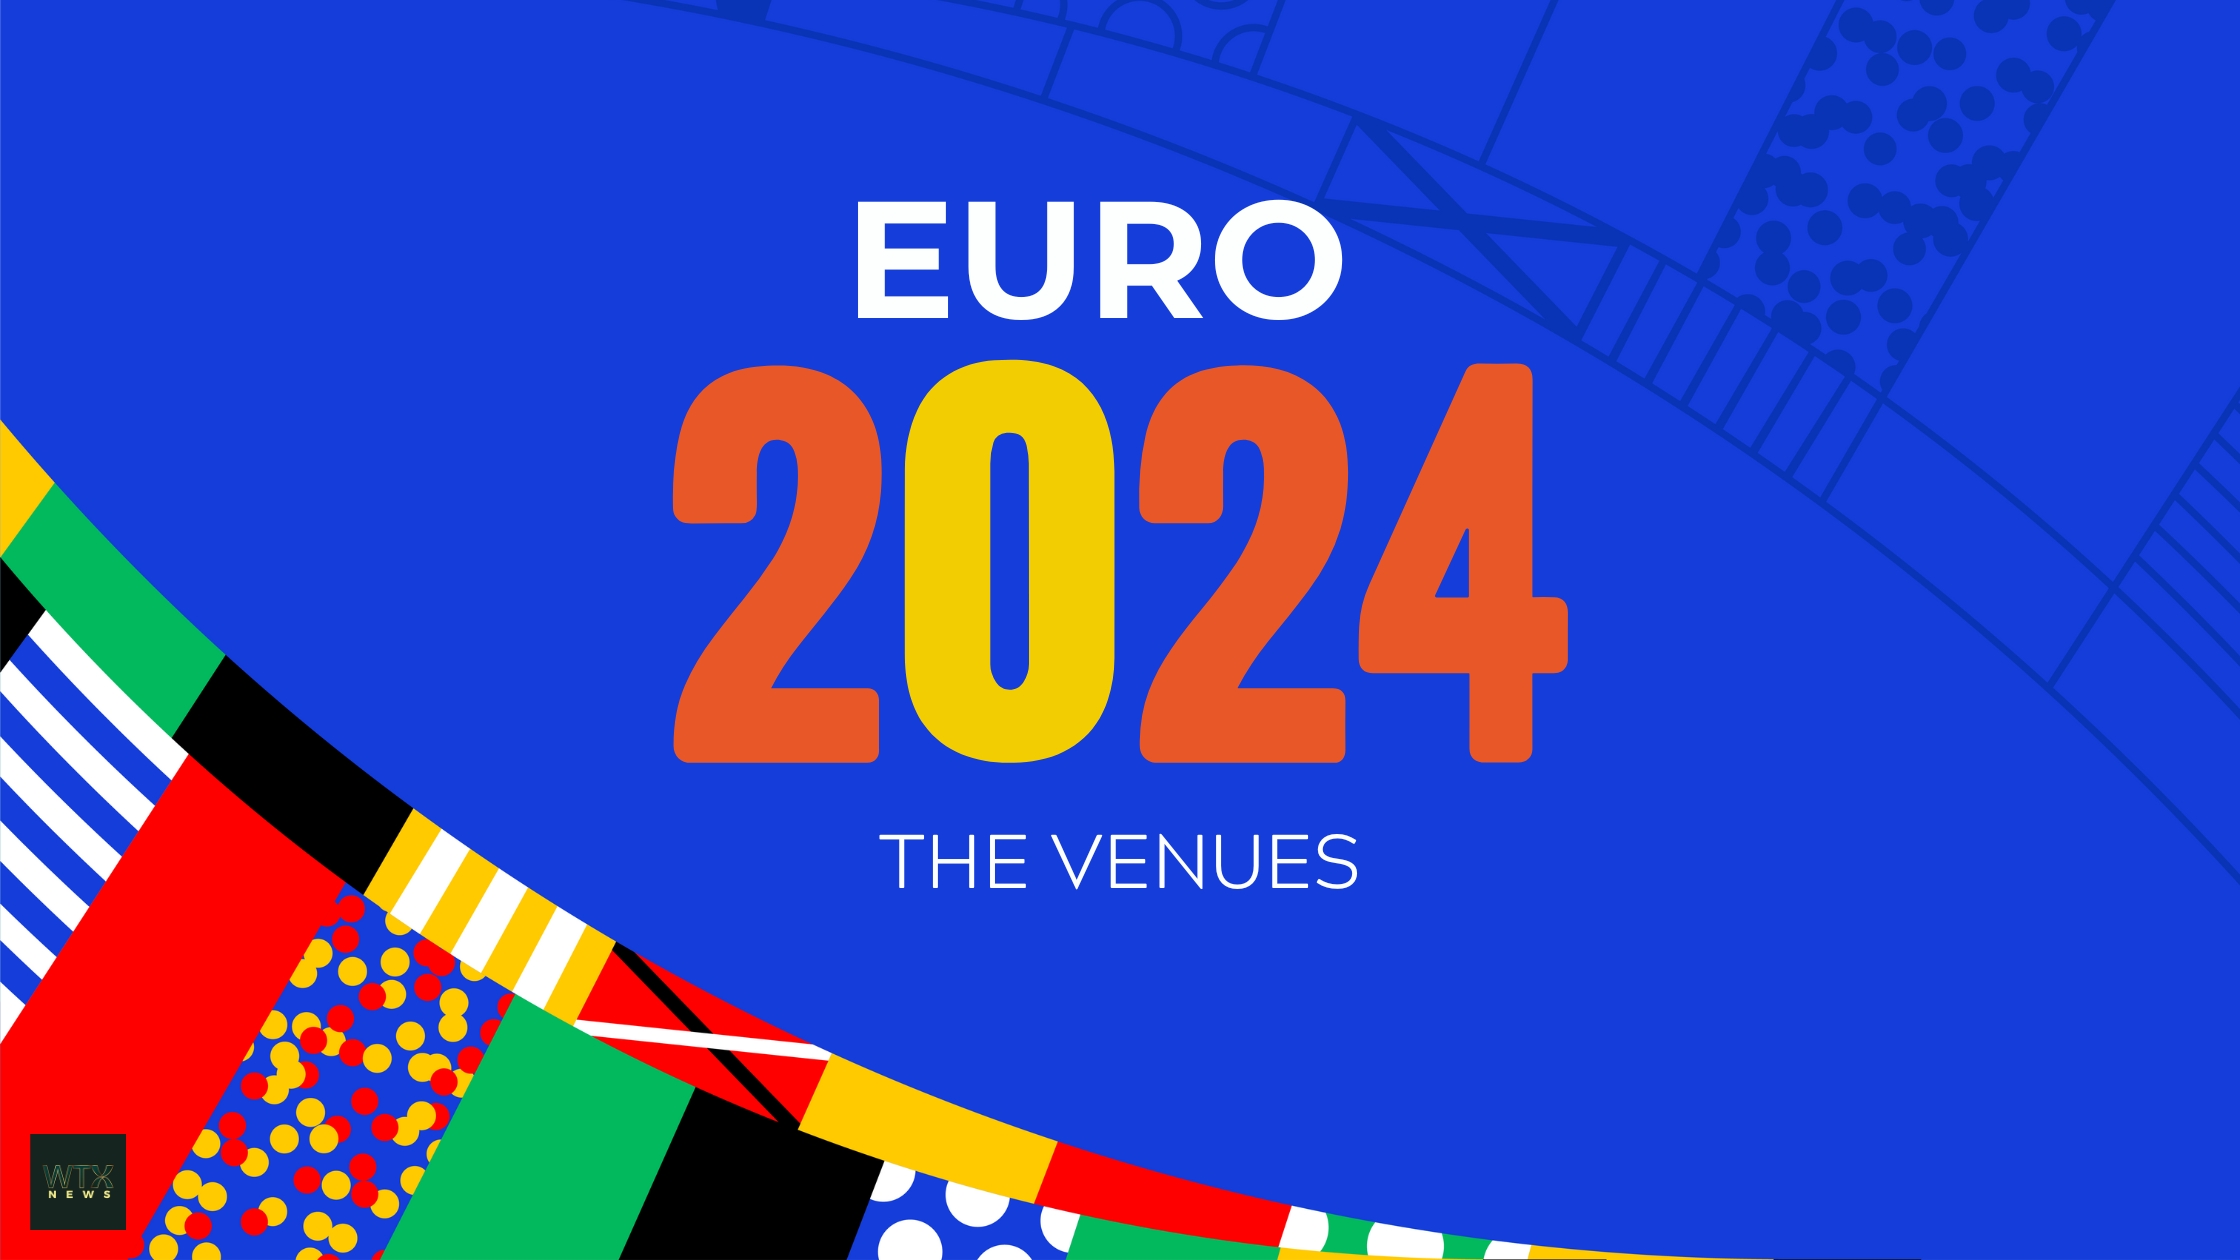 EURO 2024 Guide: What do I need to know about the venues?